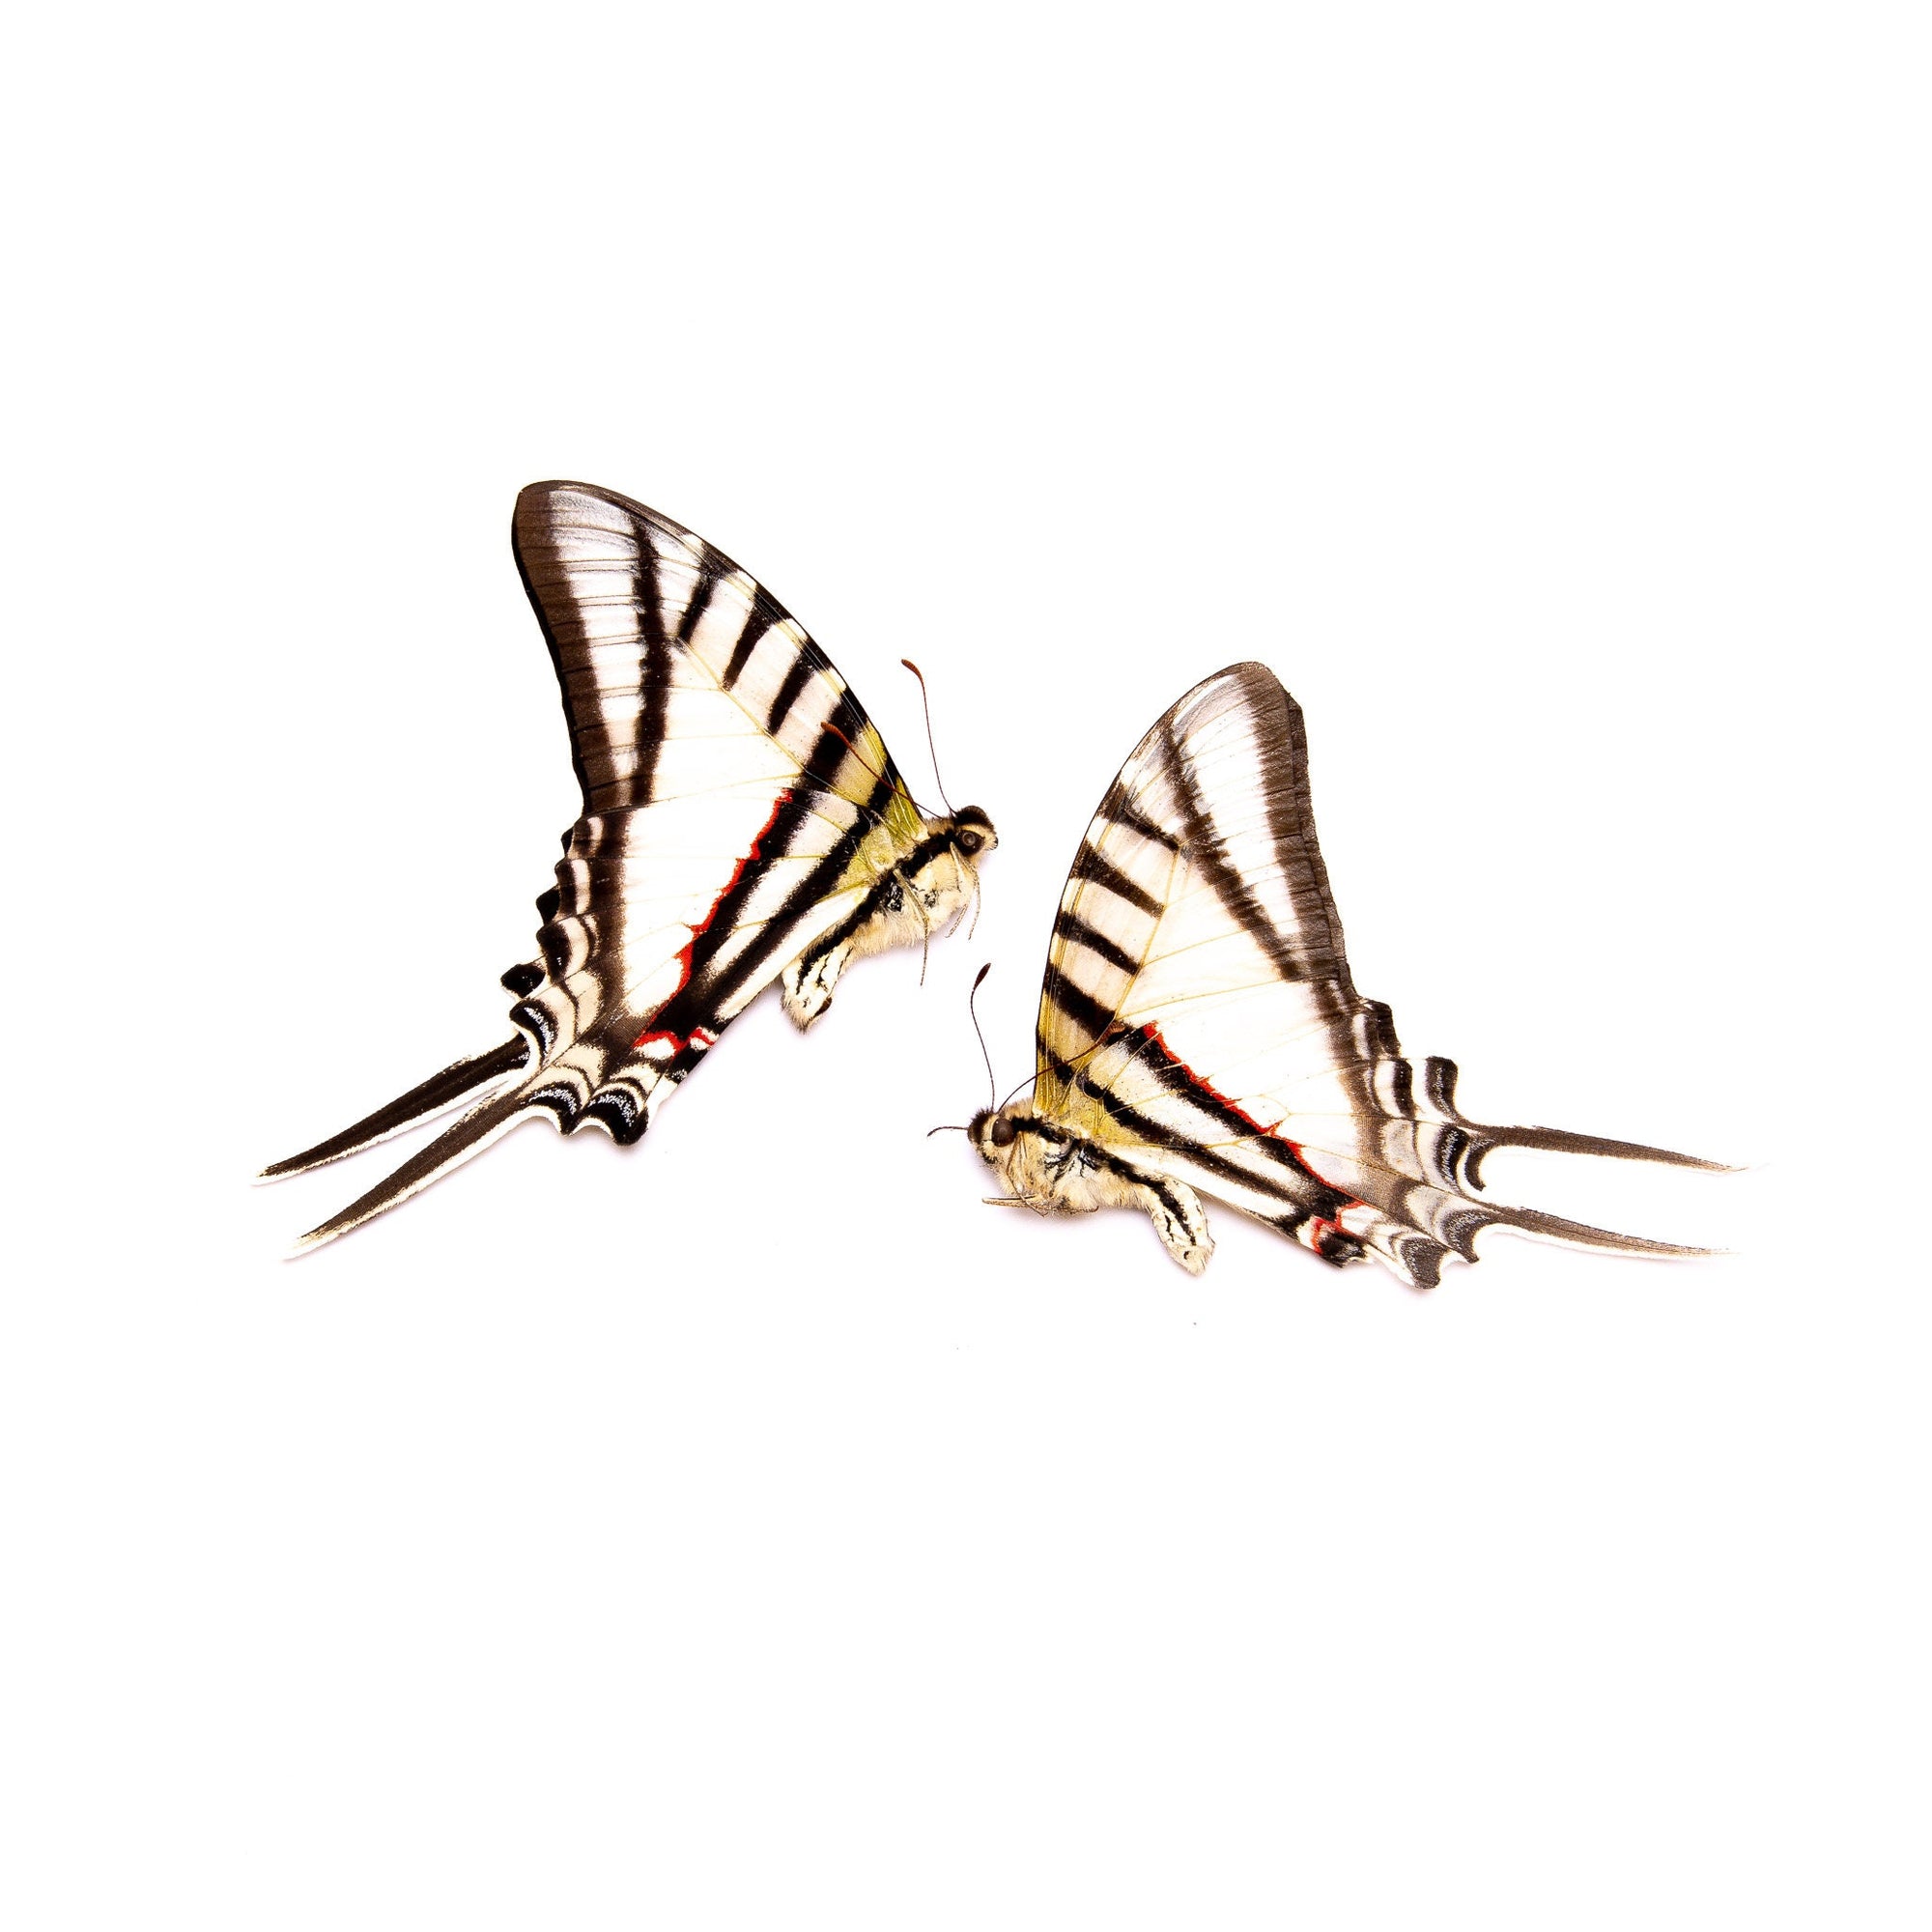 TWO (2) Zebra Swallowtail (Protesilaus protesilaus) | Unmounted Butterfies for Art and Collecting